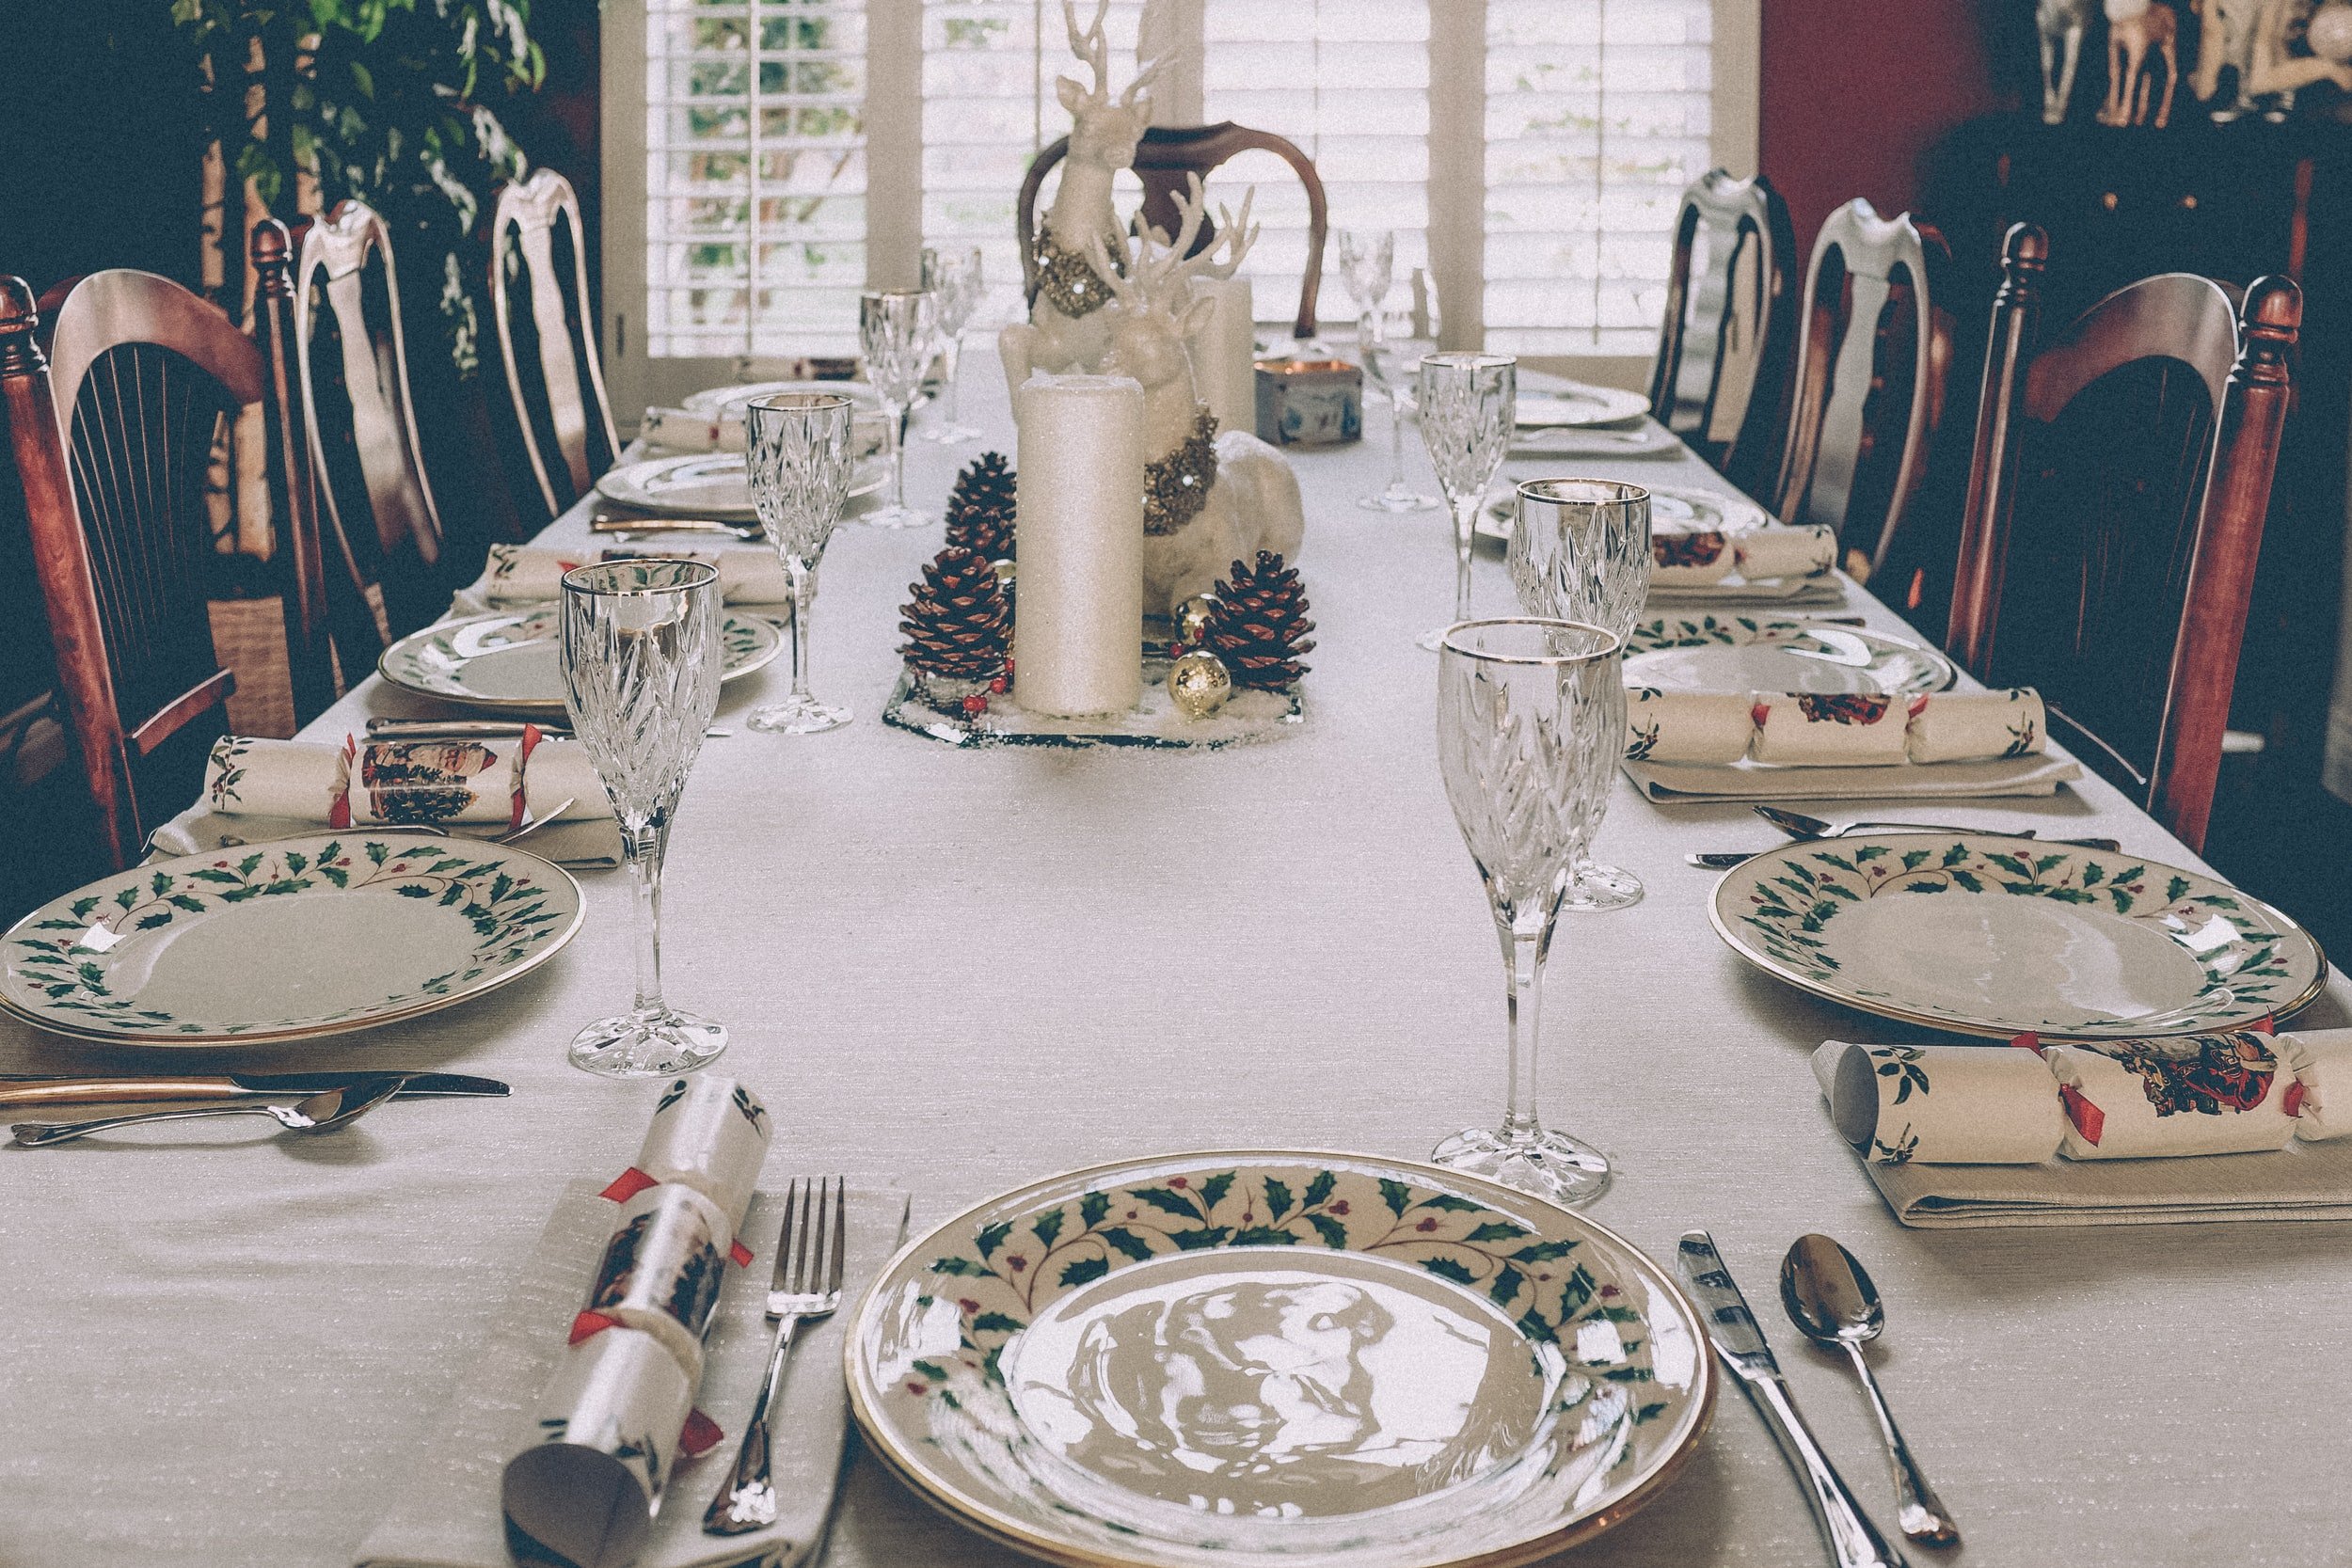 what is a tablescape?